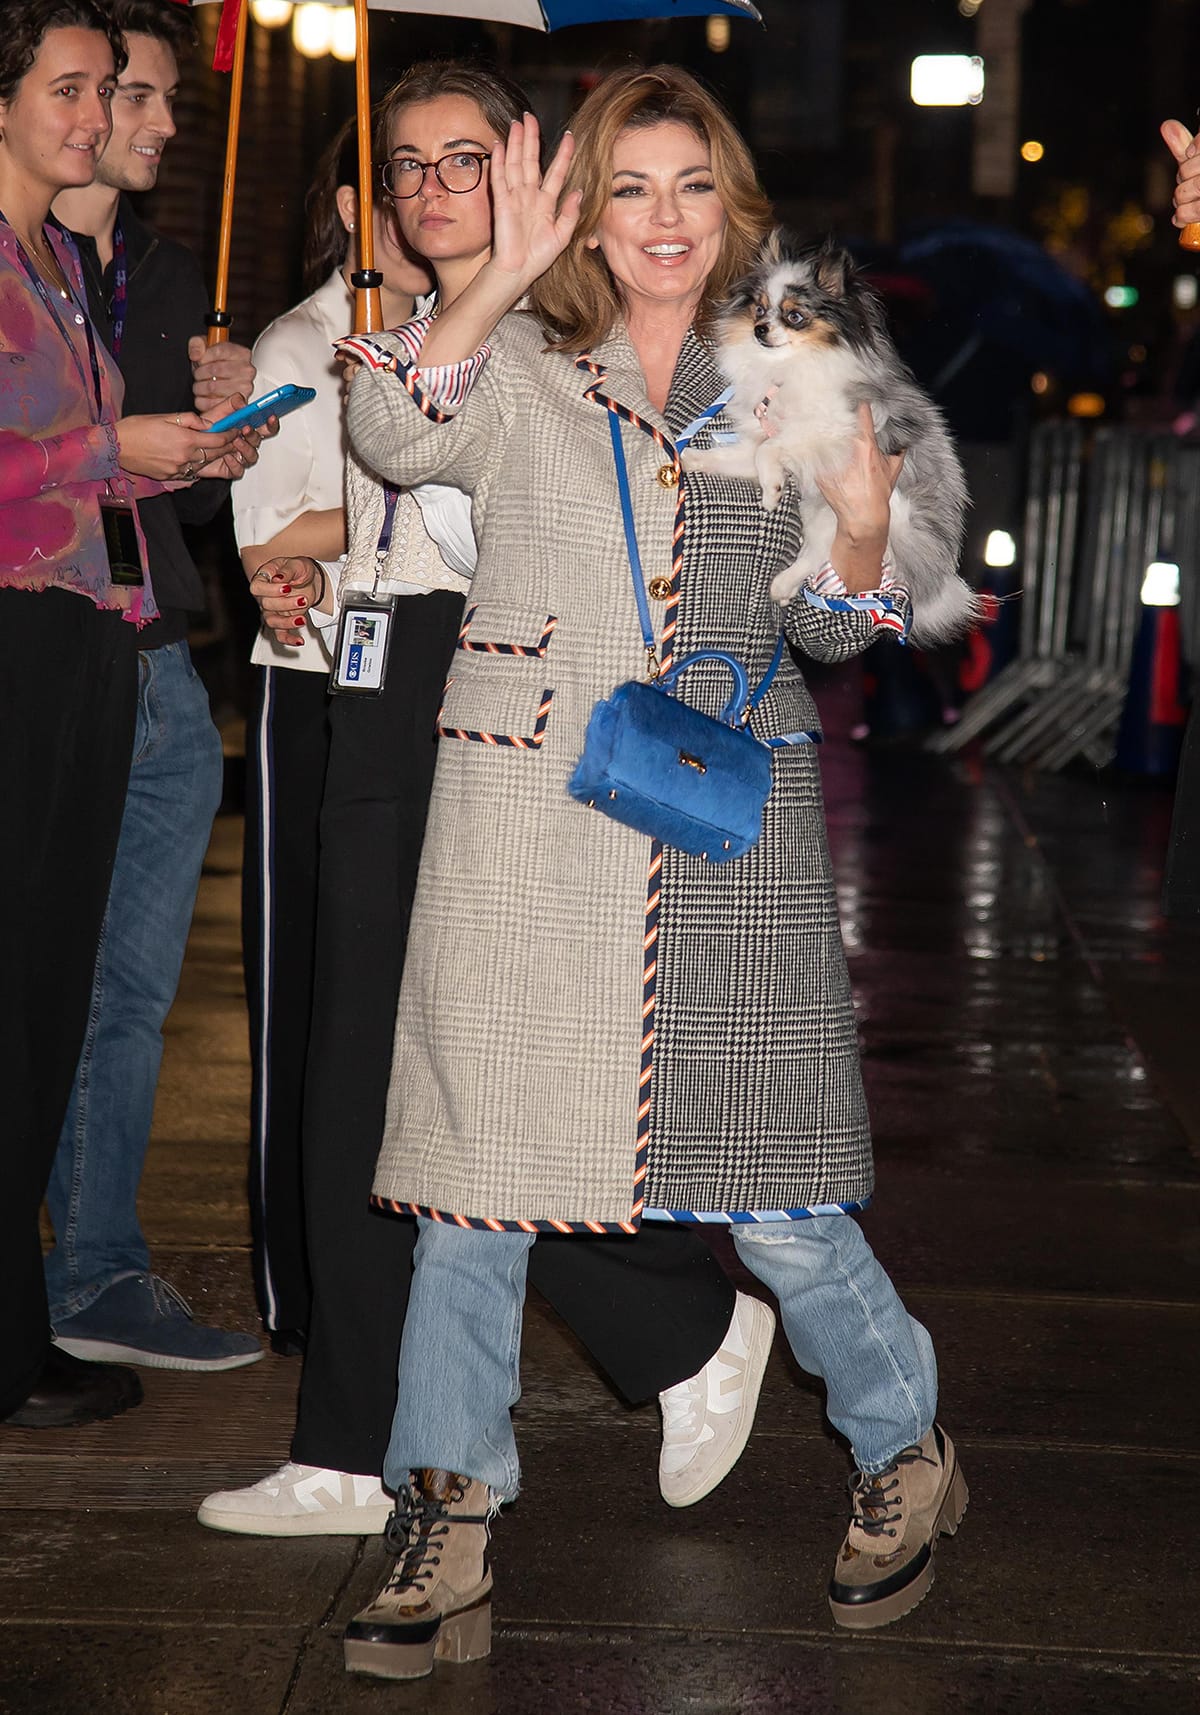 Shania Twain covers up in a multi-patterned coat with jeans and a pair of lace-up platform boots for her appearance on The Late Show with Stephen Colbert on January 4, 2023